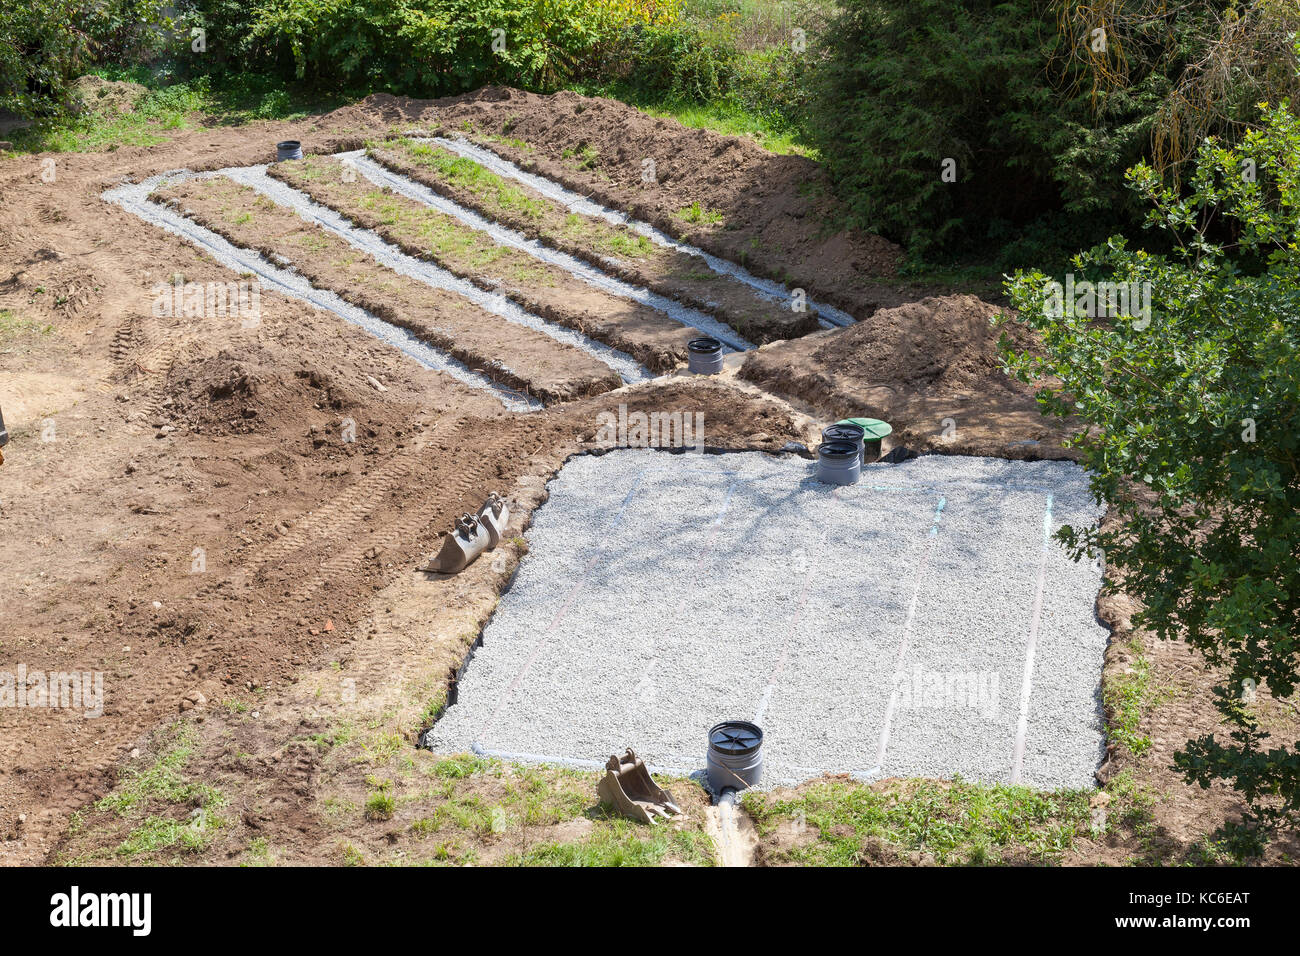 Aerial view of primary and scenodary gravel and sand filter beds for a septic tank for the disposal of household sewage and effluent being installed Stock Photo